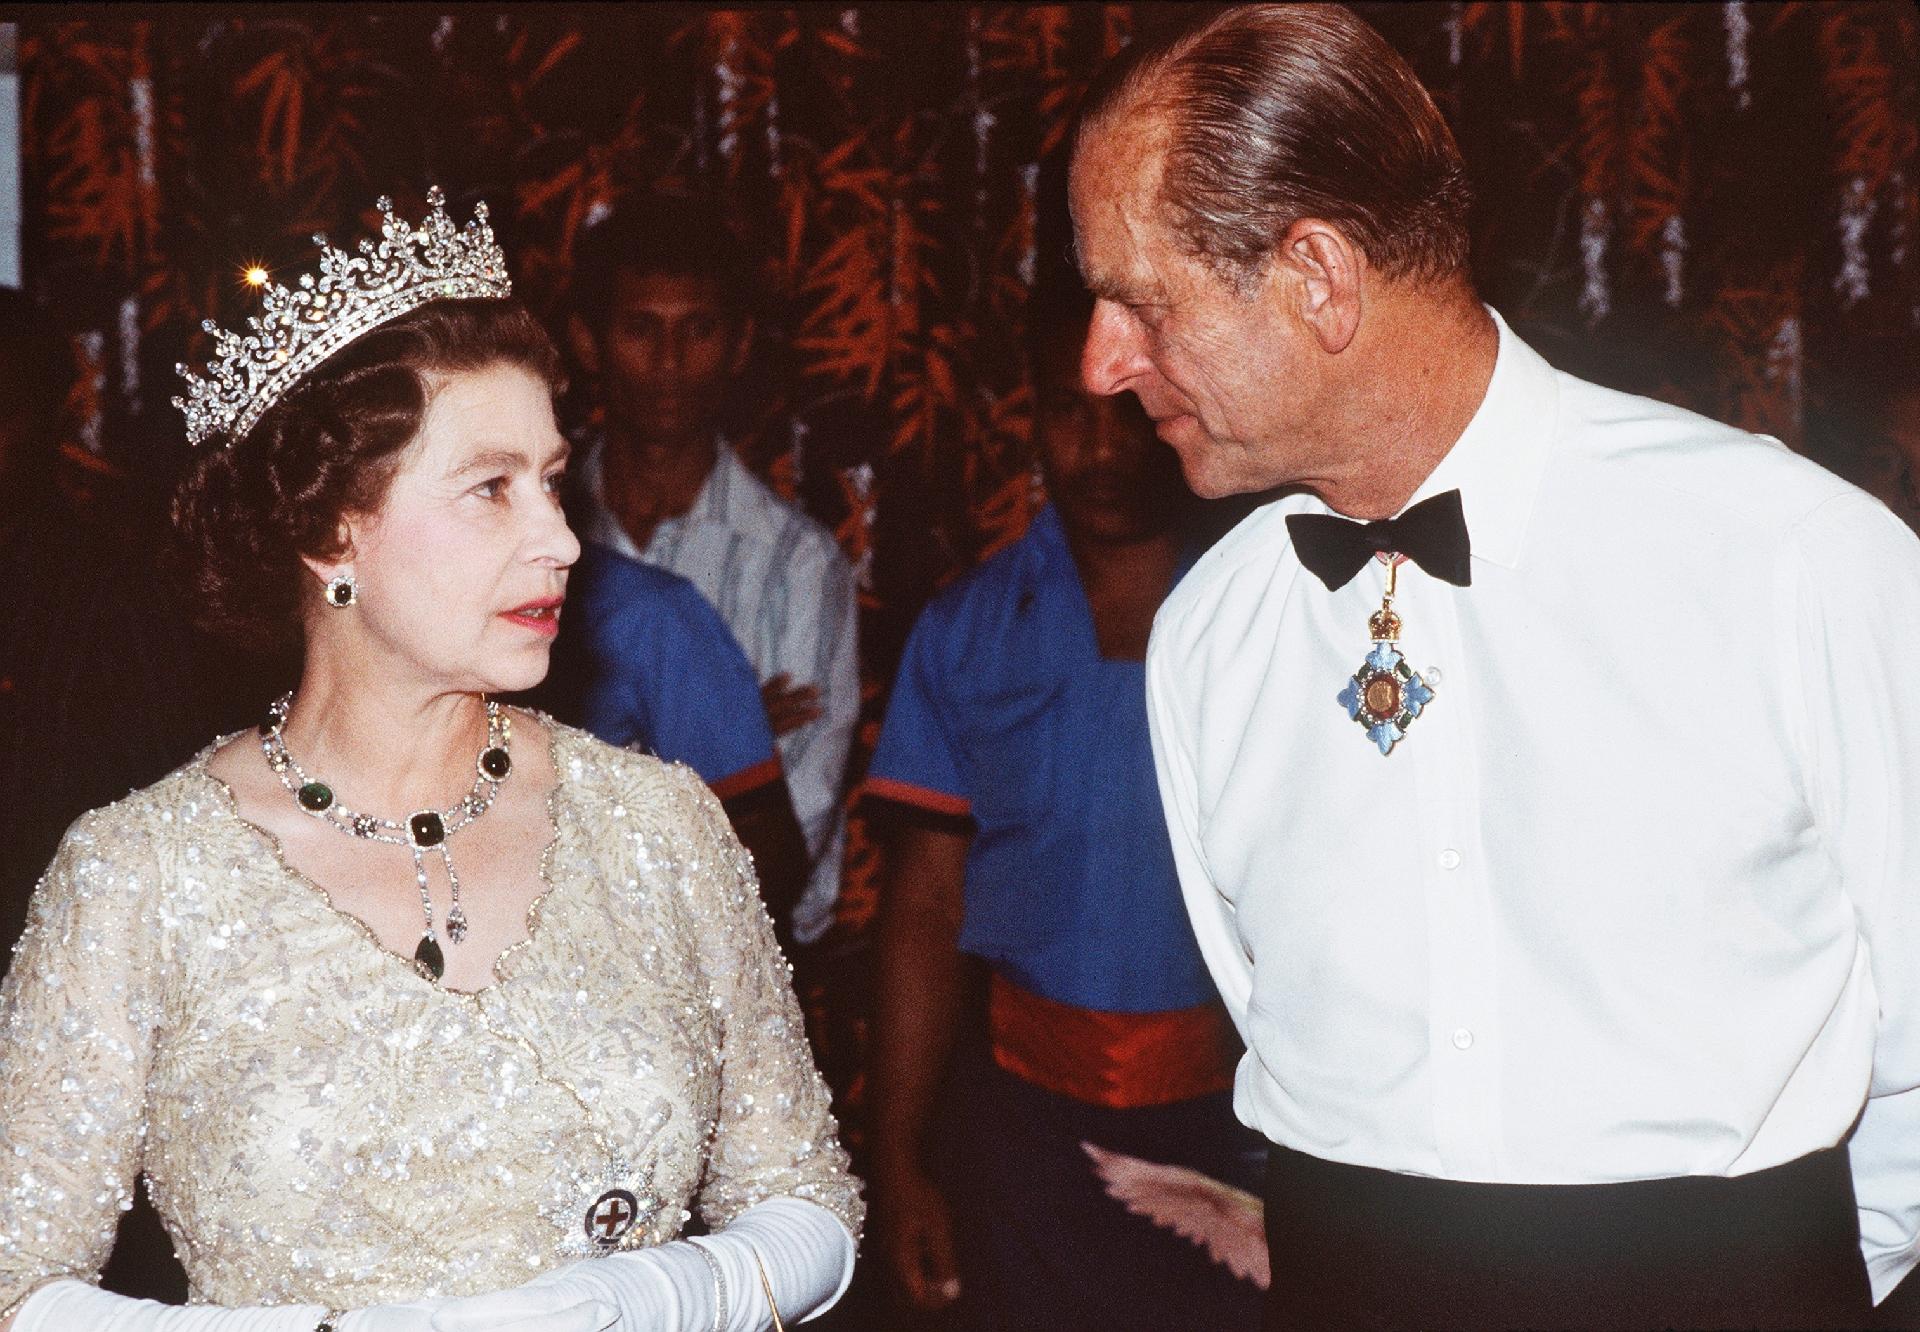 Queen Elizabeth II and Prince Phillip at a gala event in Papua New Guinea in October 1982 - Getty Images